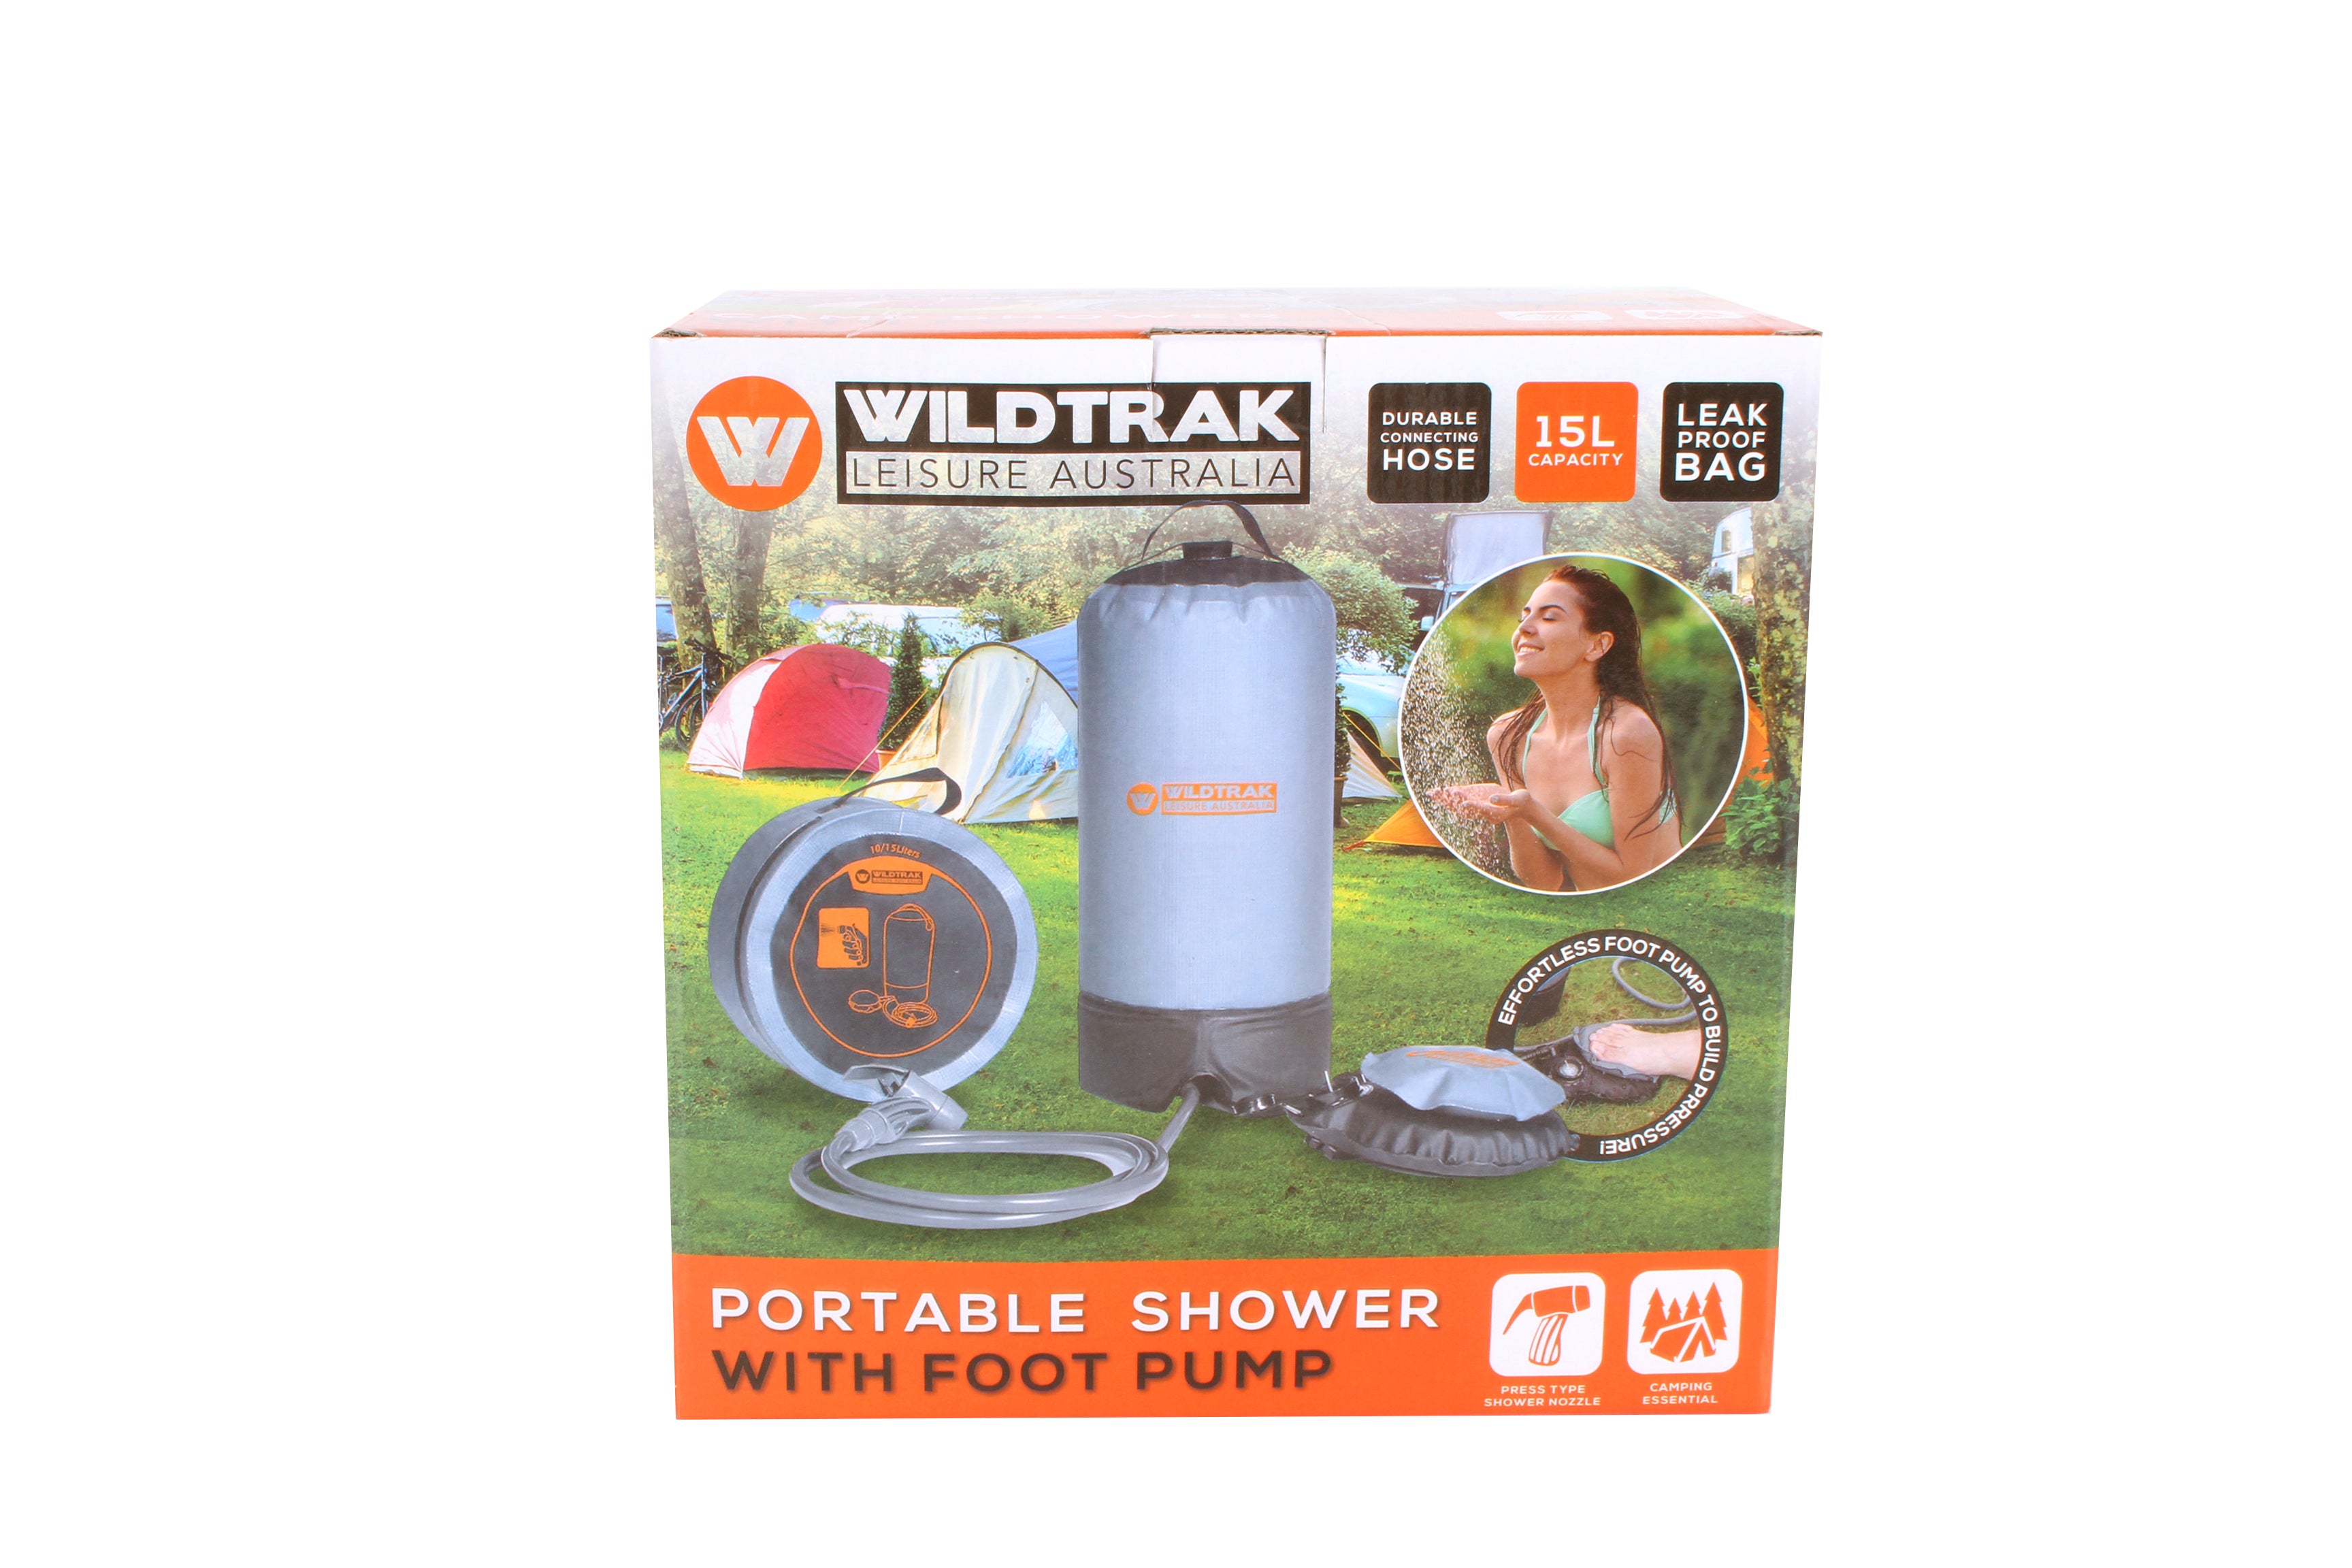 HEAVY DUTY 15L PORTABLE SHOWER BAG WITH FOOT PUMP